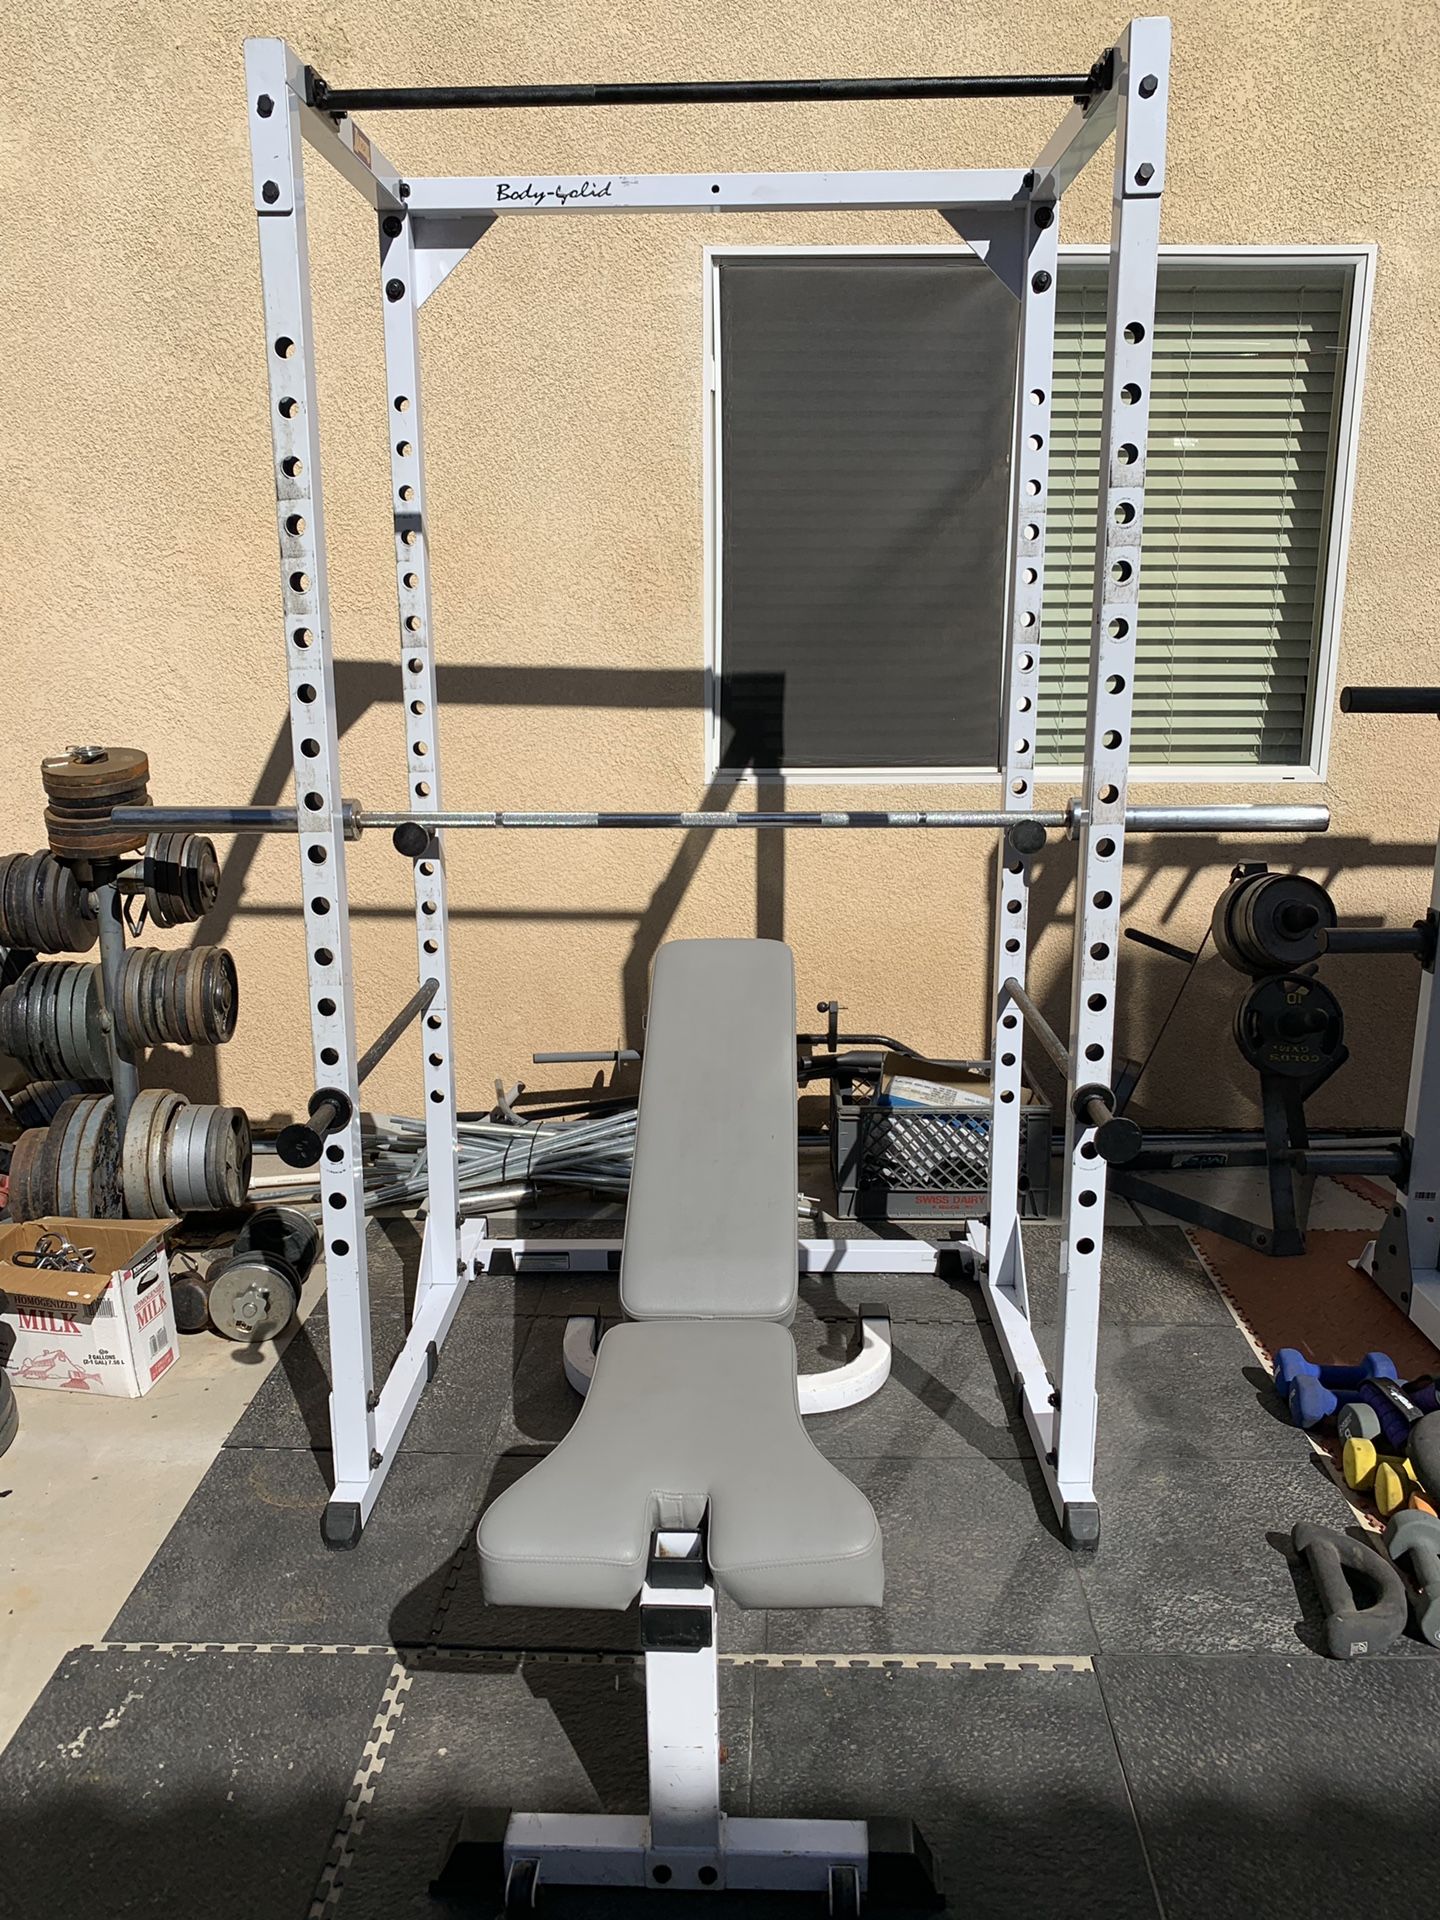 Body solid squat rack, weights plates, bar, bench and clips